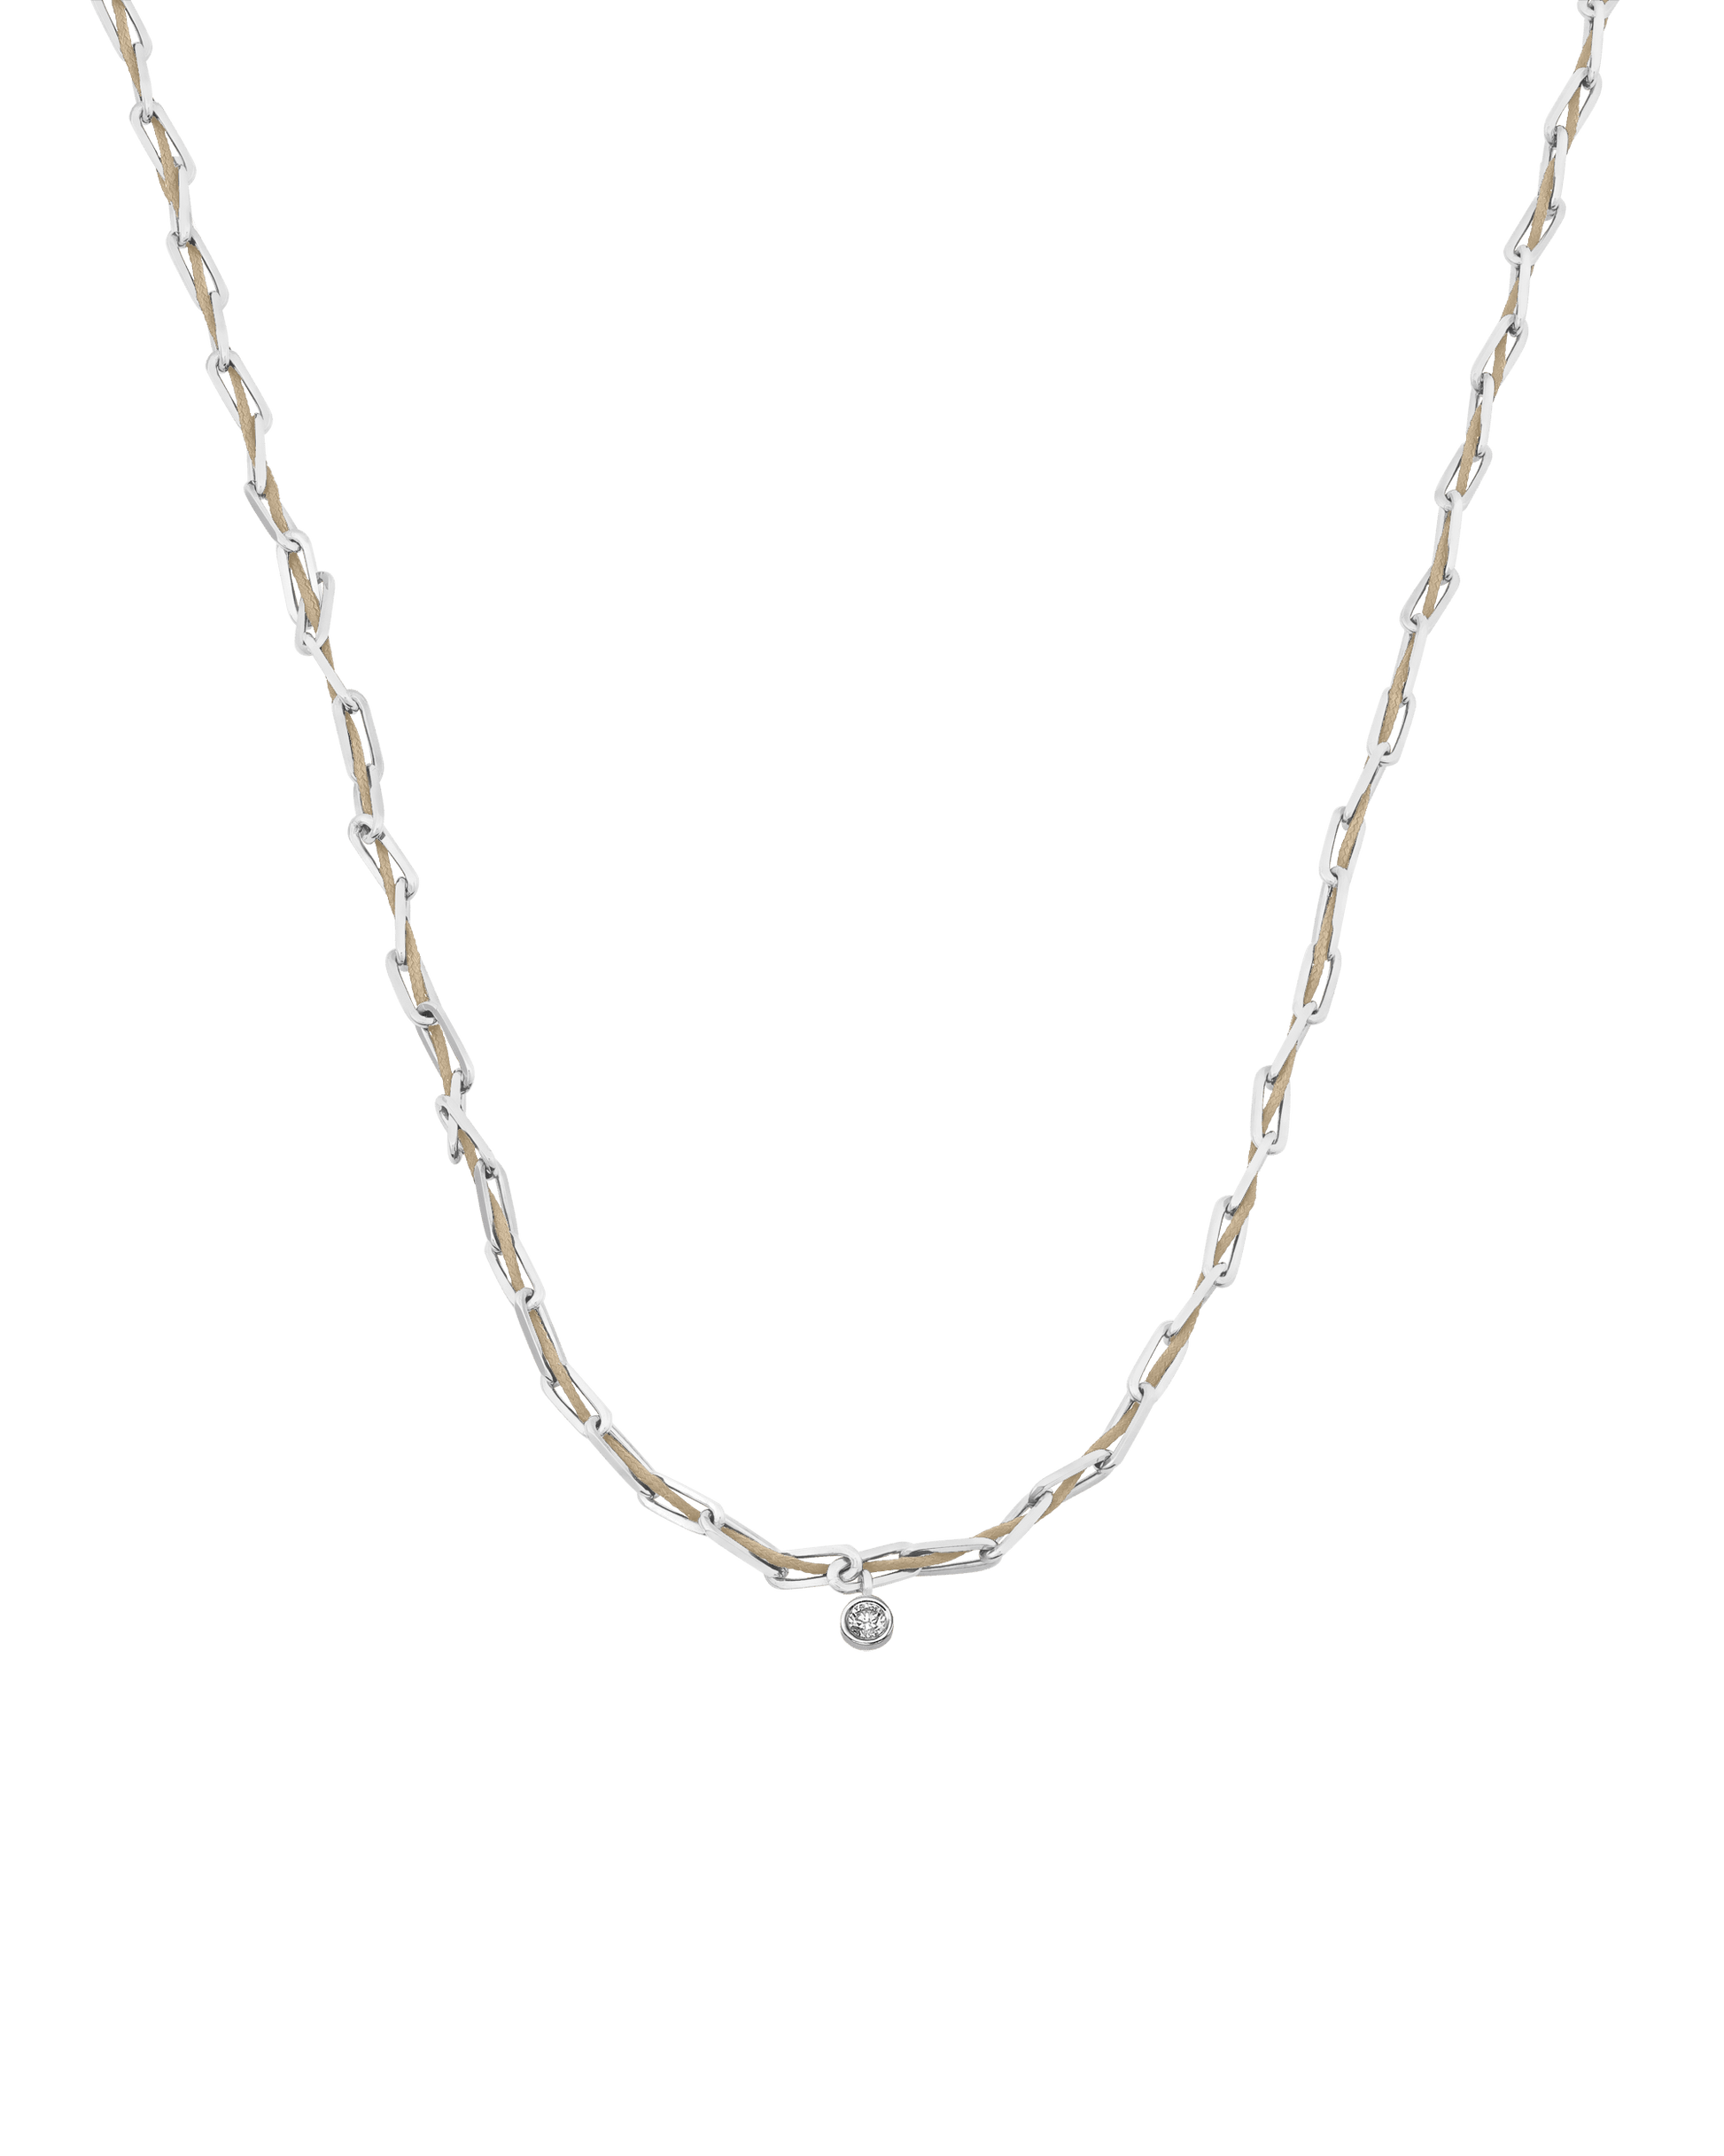 Twine Diamond Necklace - 925 Sterling Silver Necklaces magal-dev Sand Large: 0.10ct 16"